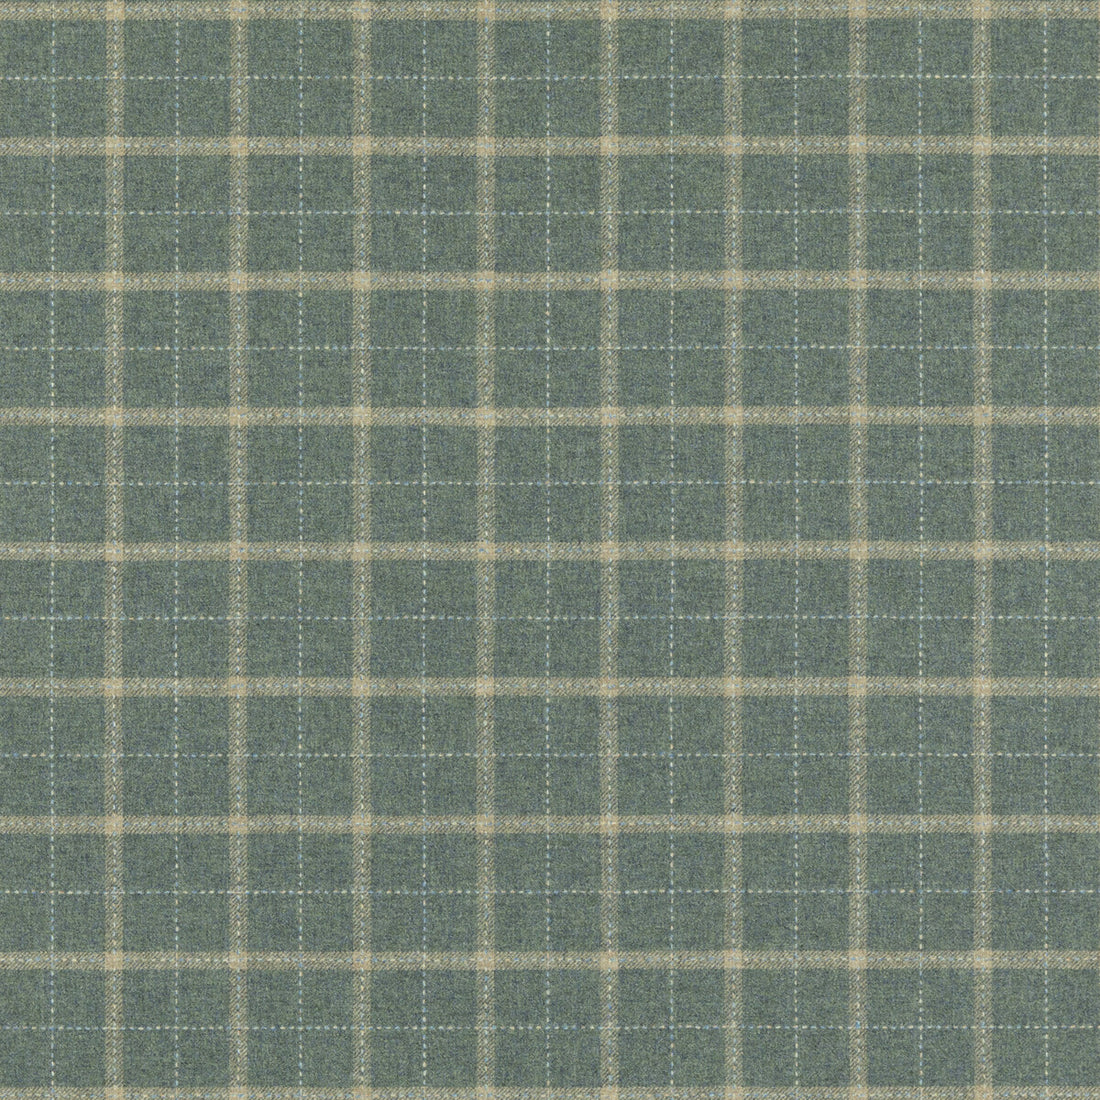 Bowmont fabric in teal color - pattern FD806.R11.0 - by Mulberry in the Mulberry Wools IV collection